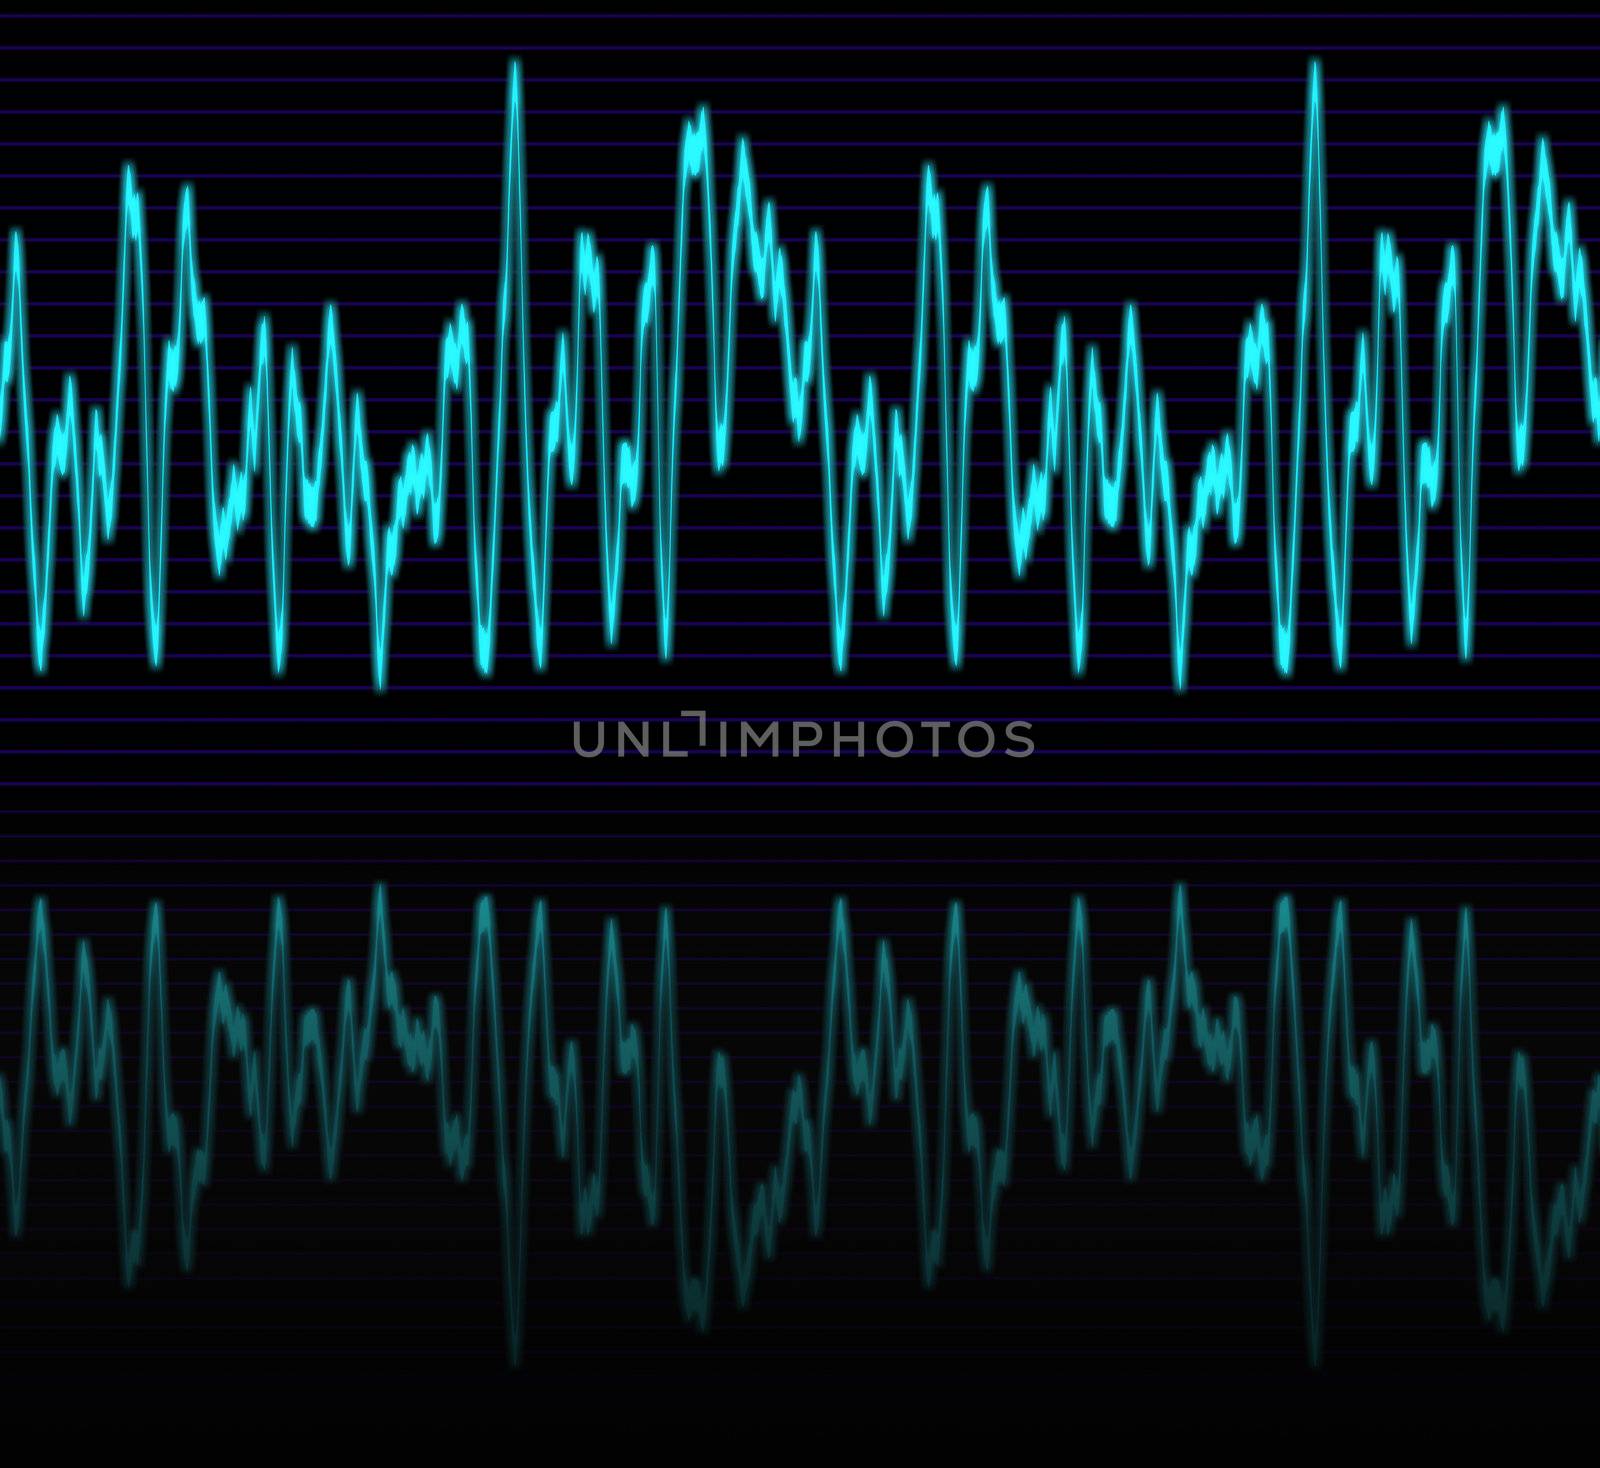 image of a glowing audio or sine wave with reflection